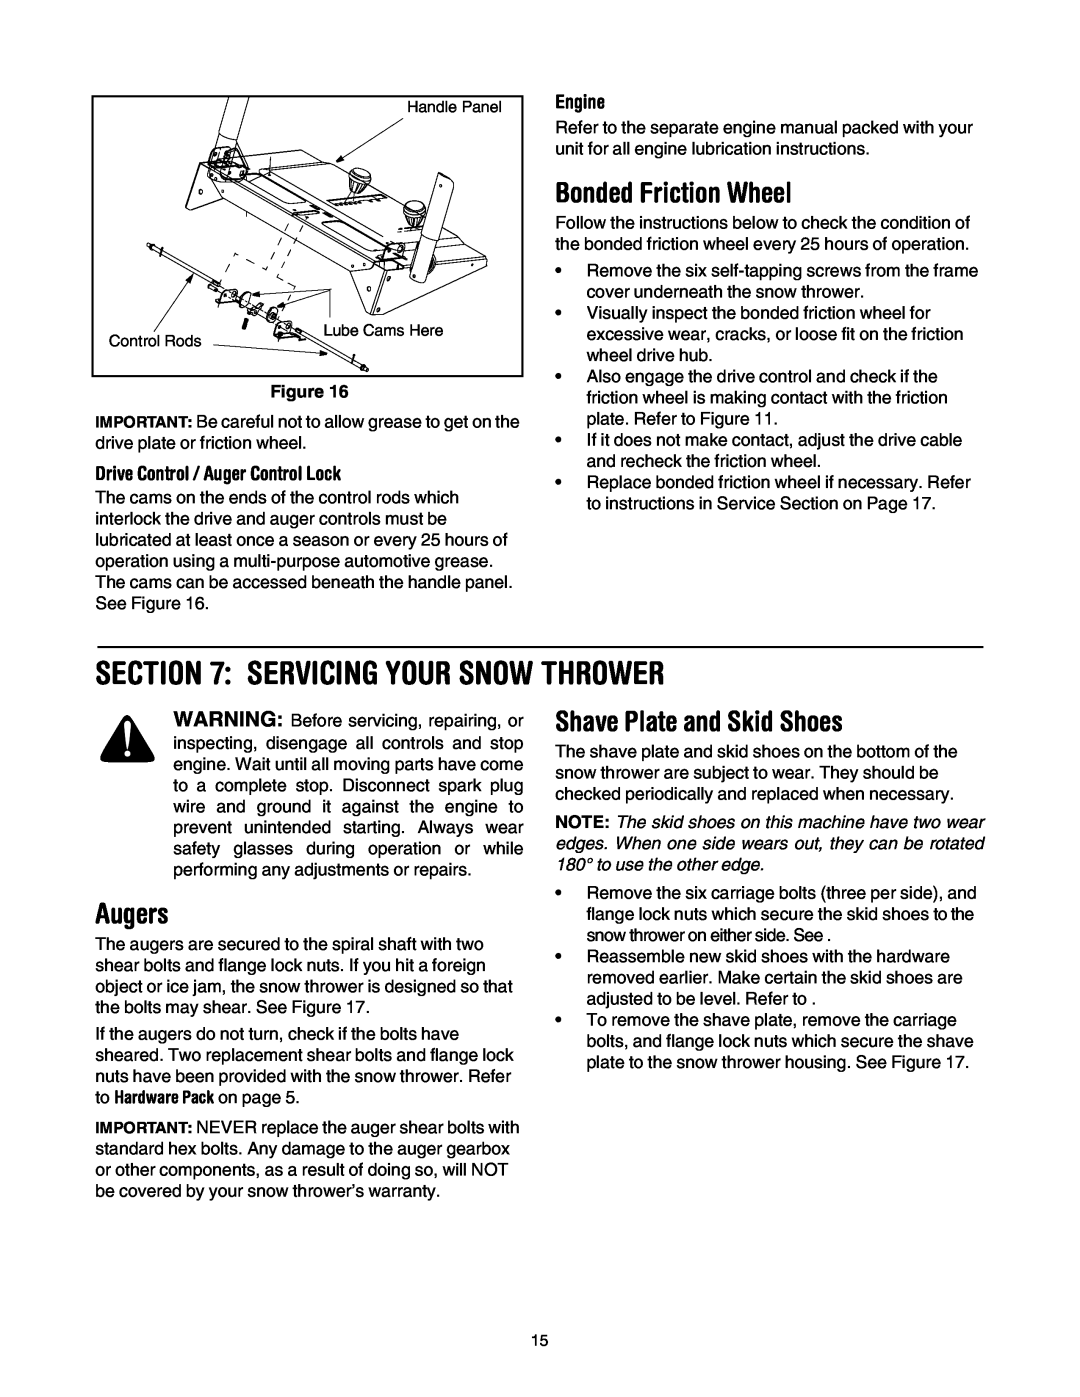 Troy-Bilt 10530 manual Servicing Your Snow Thrower, Bonded Friction Wheel, Augers, Shave Plate and Skid Shoes, Engine 